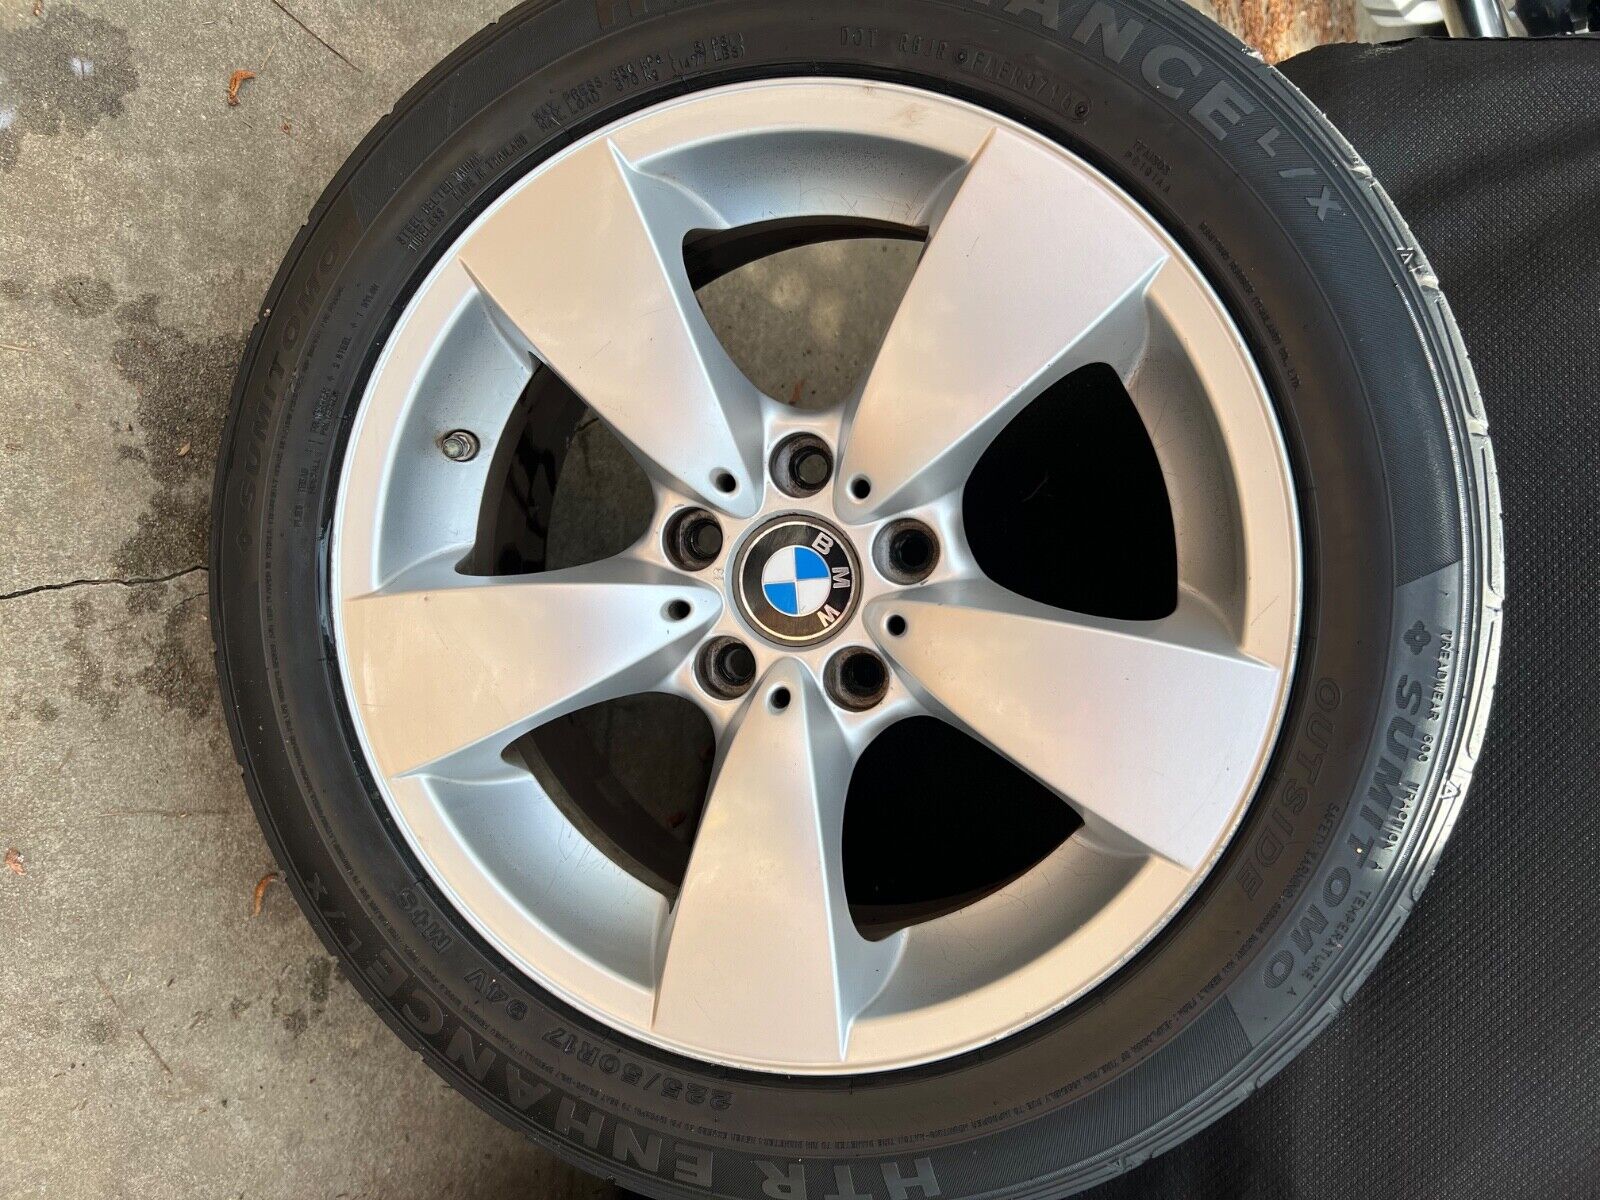 E60 BMW 530i FACTORY OEM RIMS AND TIRES CONTINENTAL DWS ALL SEASON SIZE 50R17 